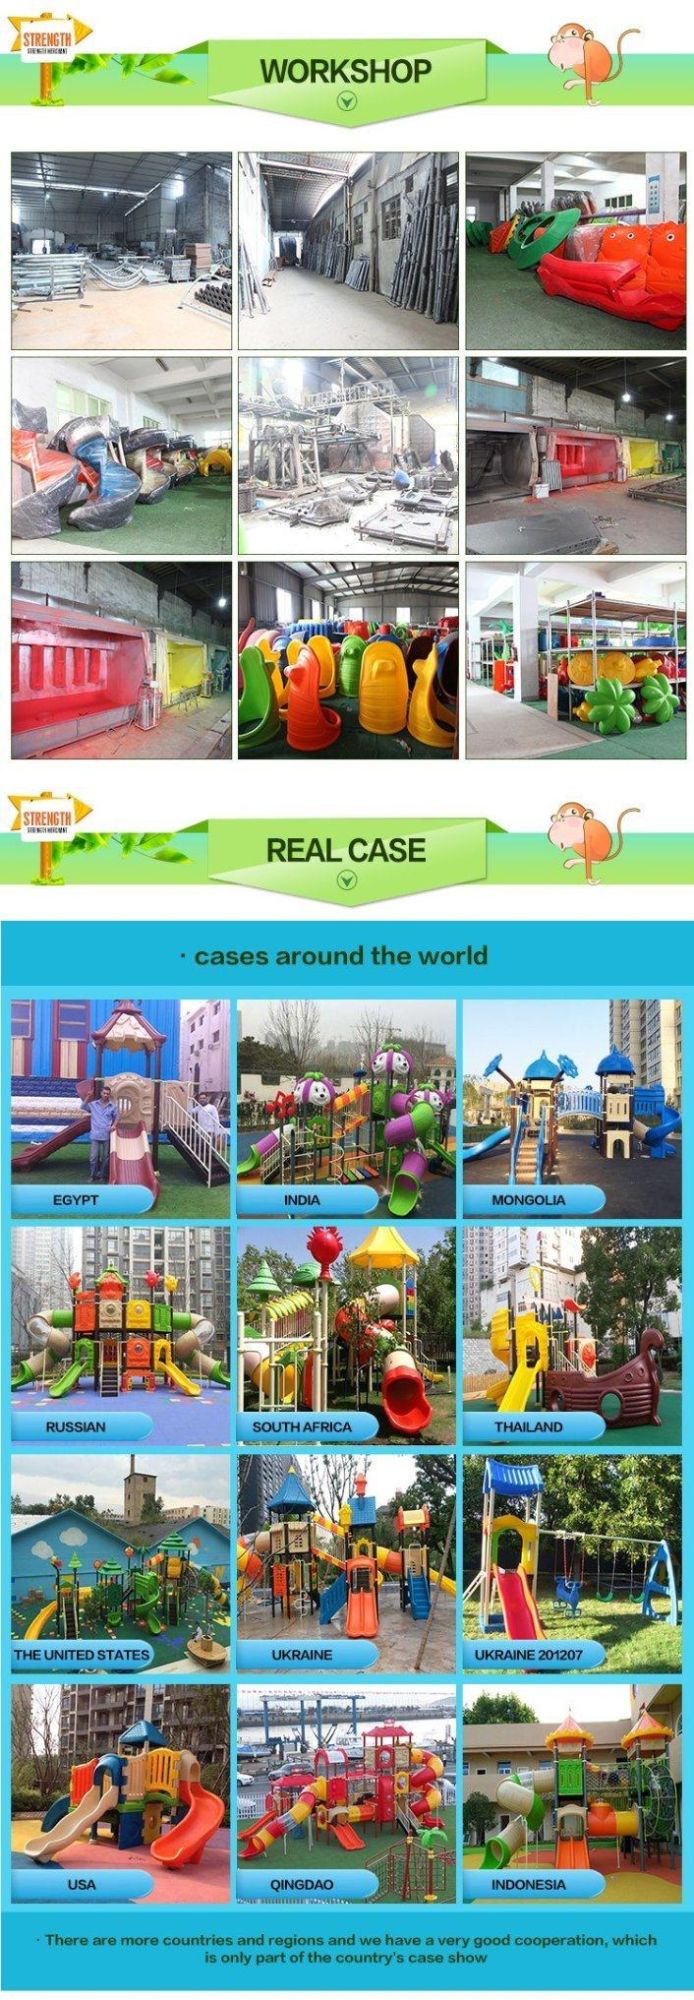 High Quality LLDPE Plastic Outdoor Park Kids Outdoor Playground Equipment UV-Resistant Anti-Fading Play Slide Structure